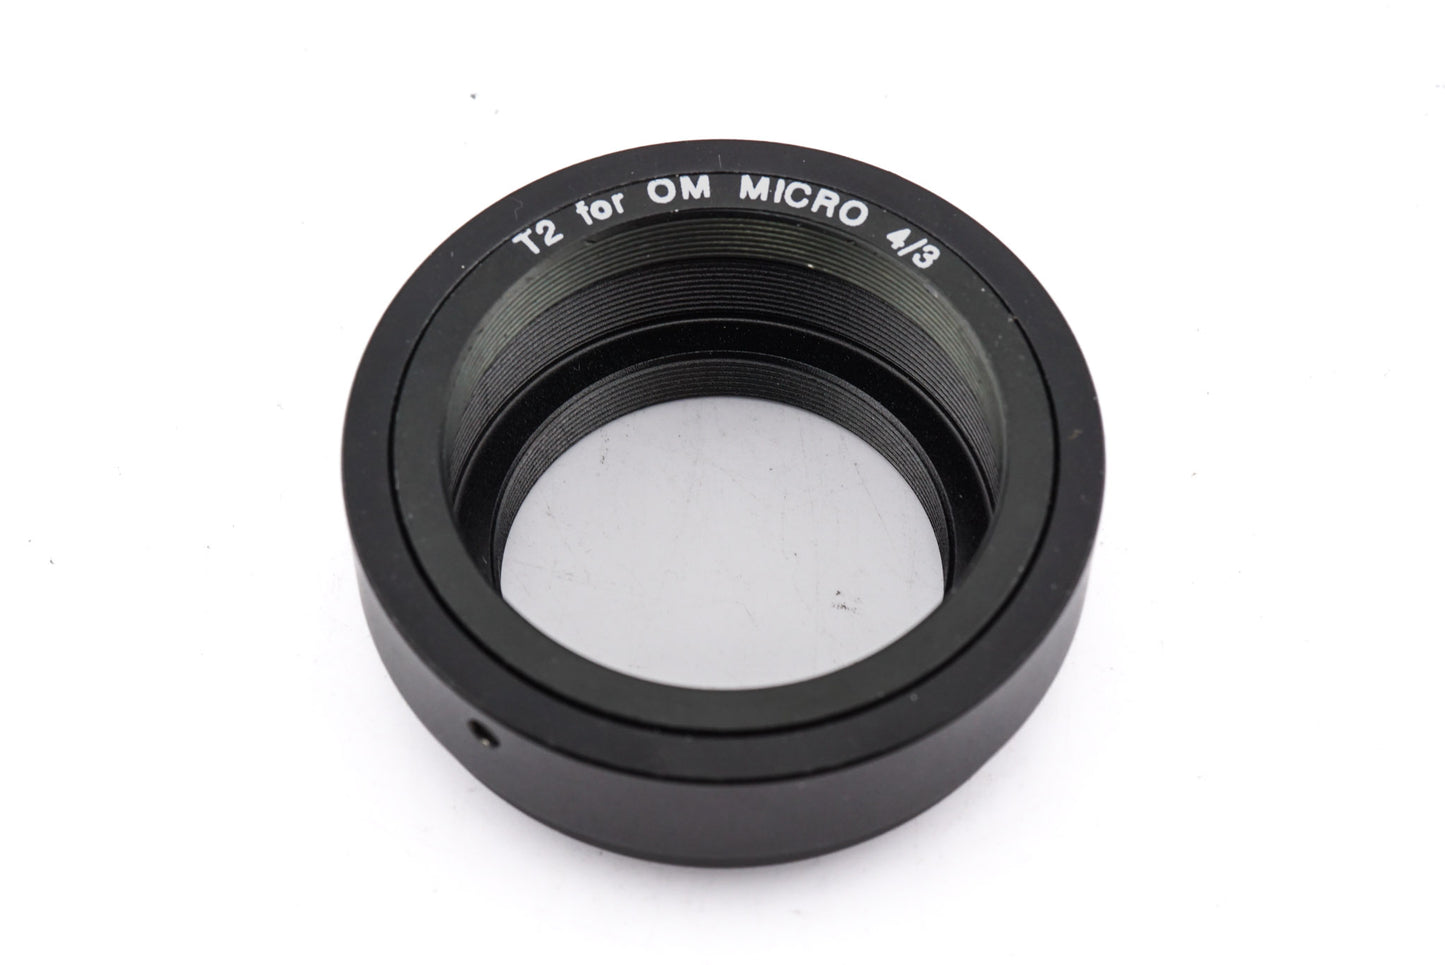 Generic T2 - Micro Four Thirds (T2 - M4/3) Adapter - Lens Adapter